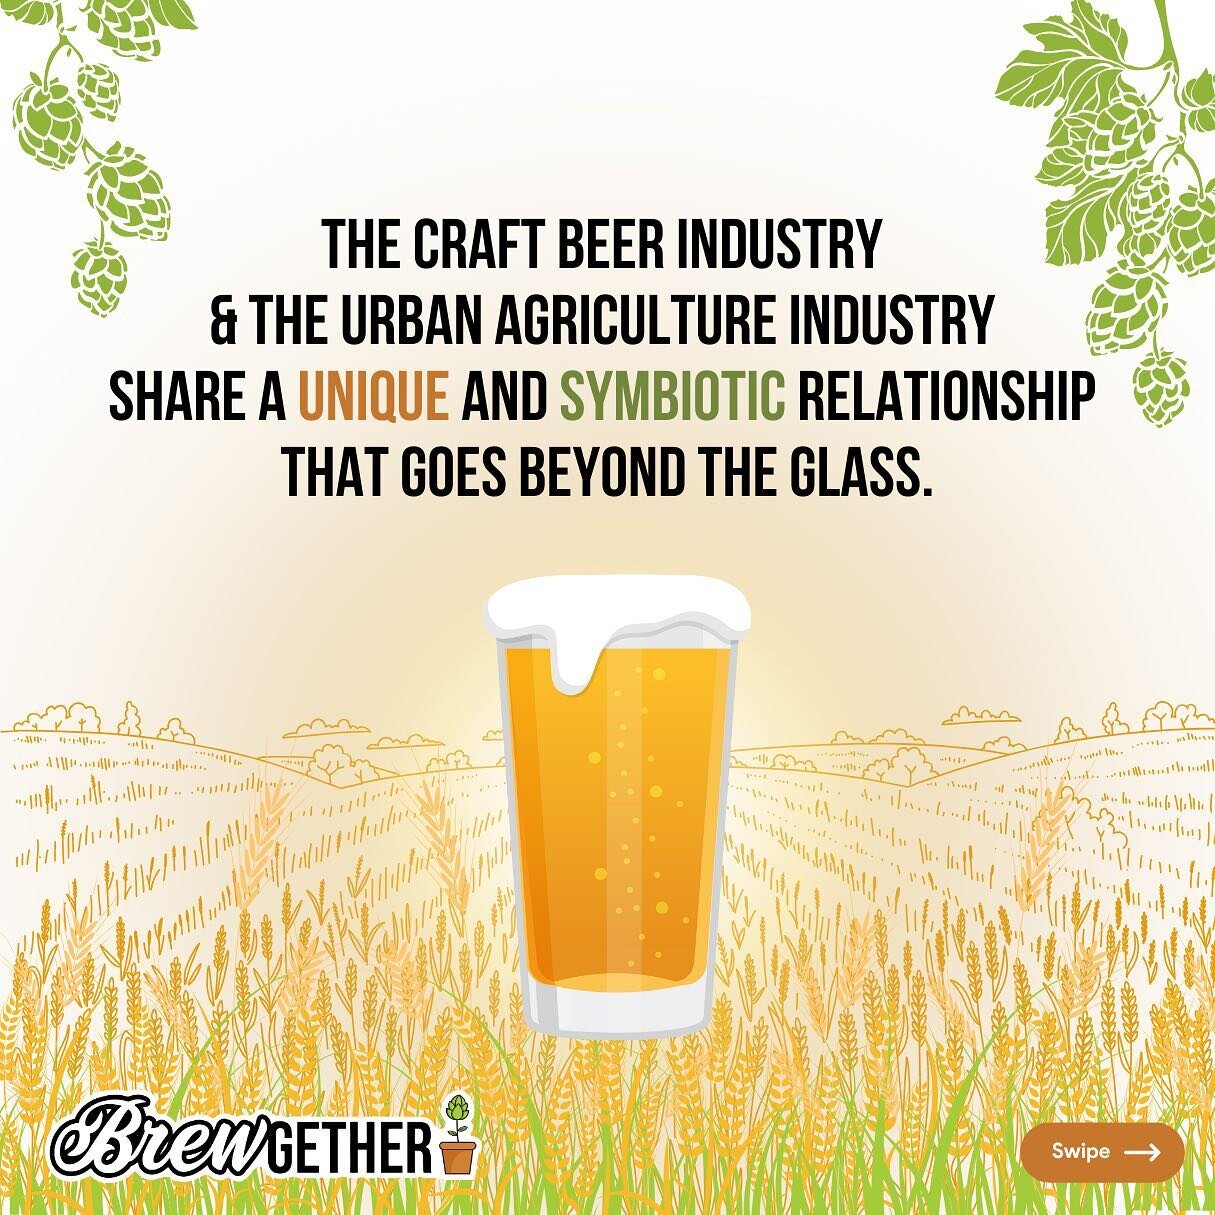 The craft beer industry and the urban agriculture industry share a unique and symbiotic relationship that goes beyond the glass. &lt;SWIPE&gt; #craftbeerxcommunity